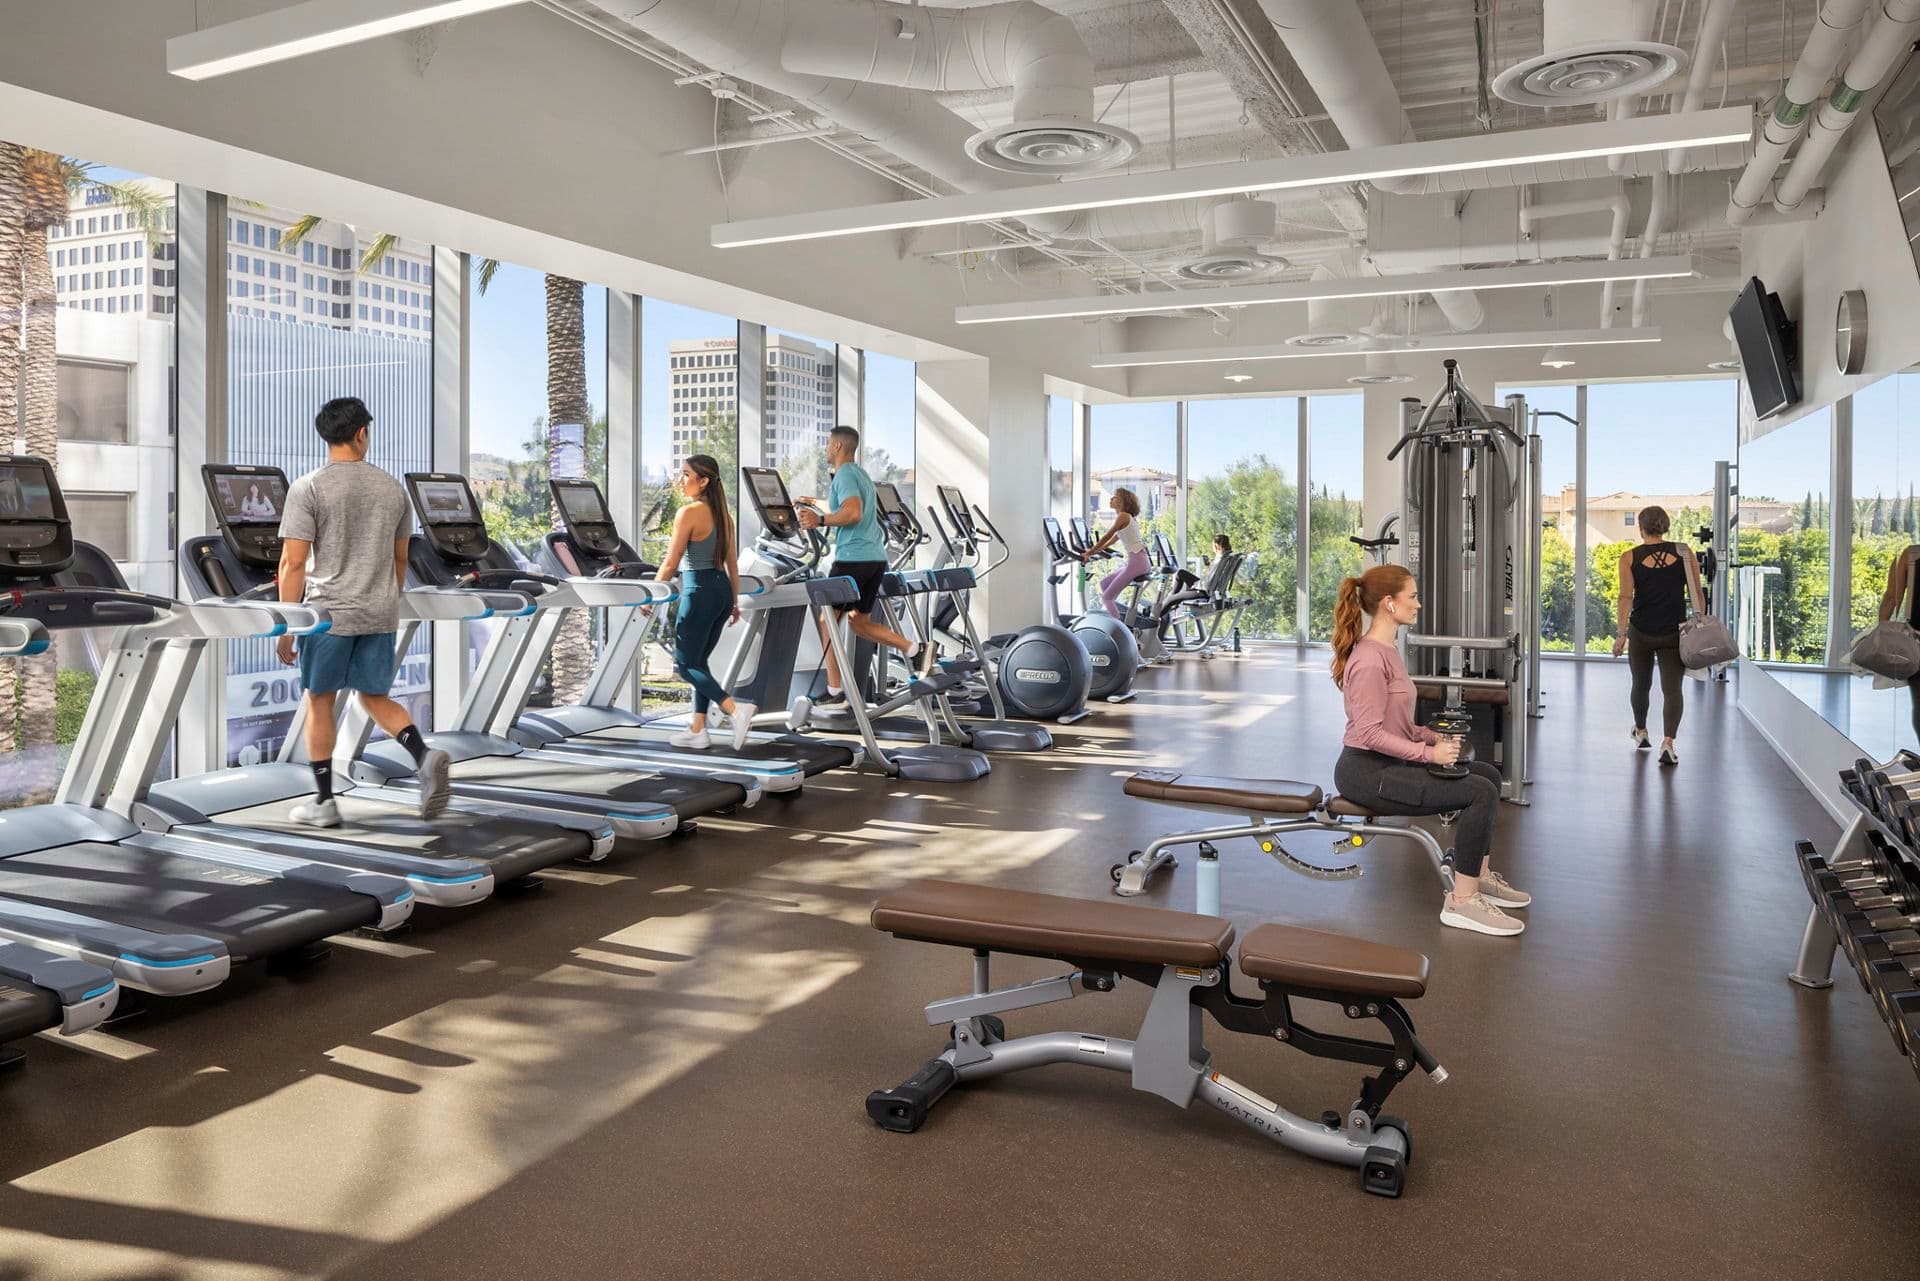 Interior lifestyle photography of Kinetic Fitness center at 200 Spectrum Center Drive in Irvine, CA.